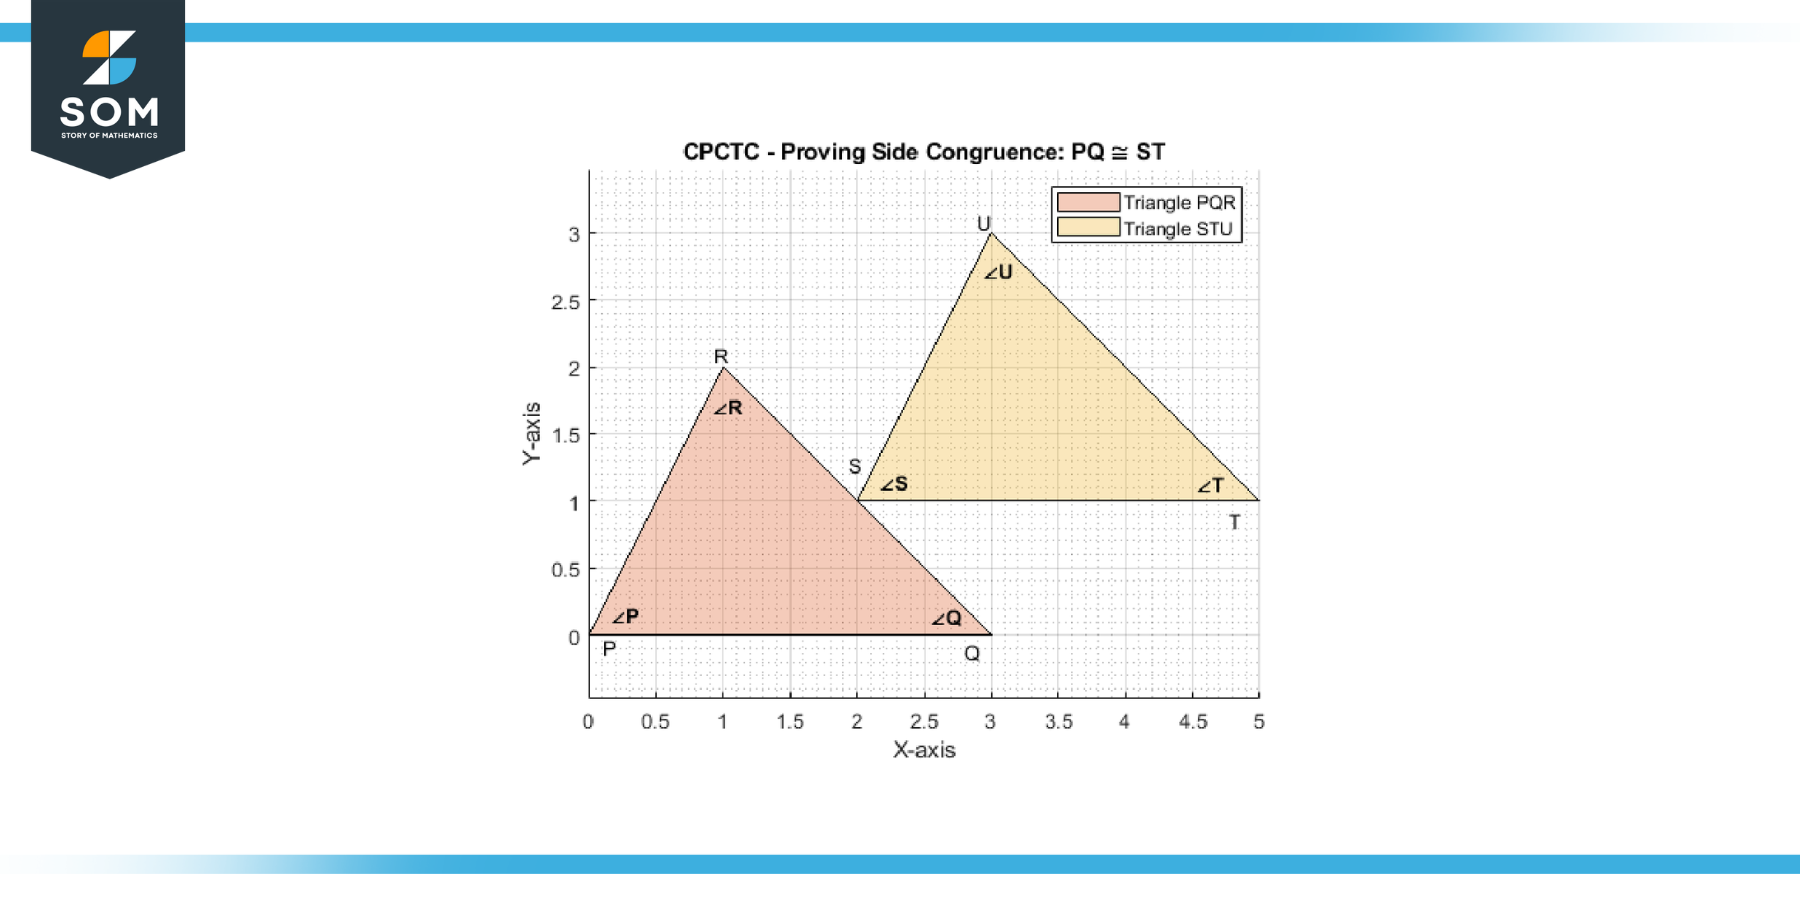 CPCTC for triangle PQR and triangle STU